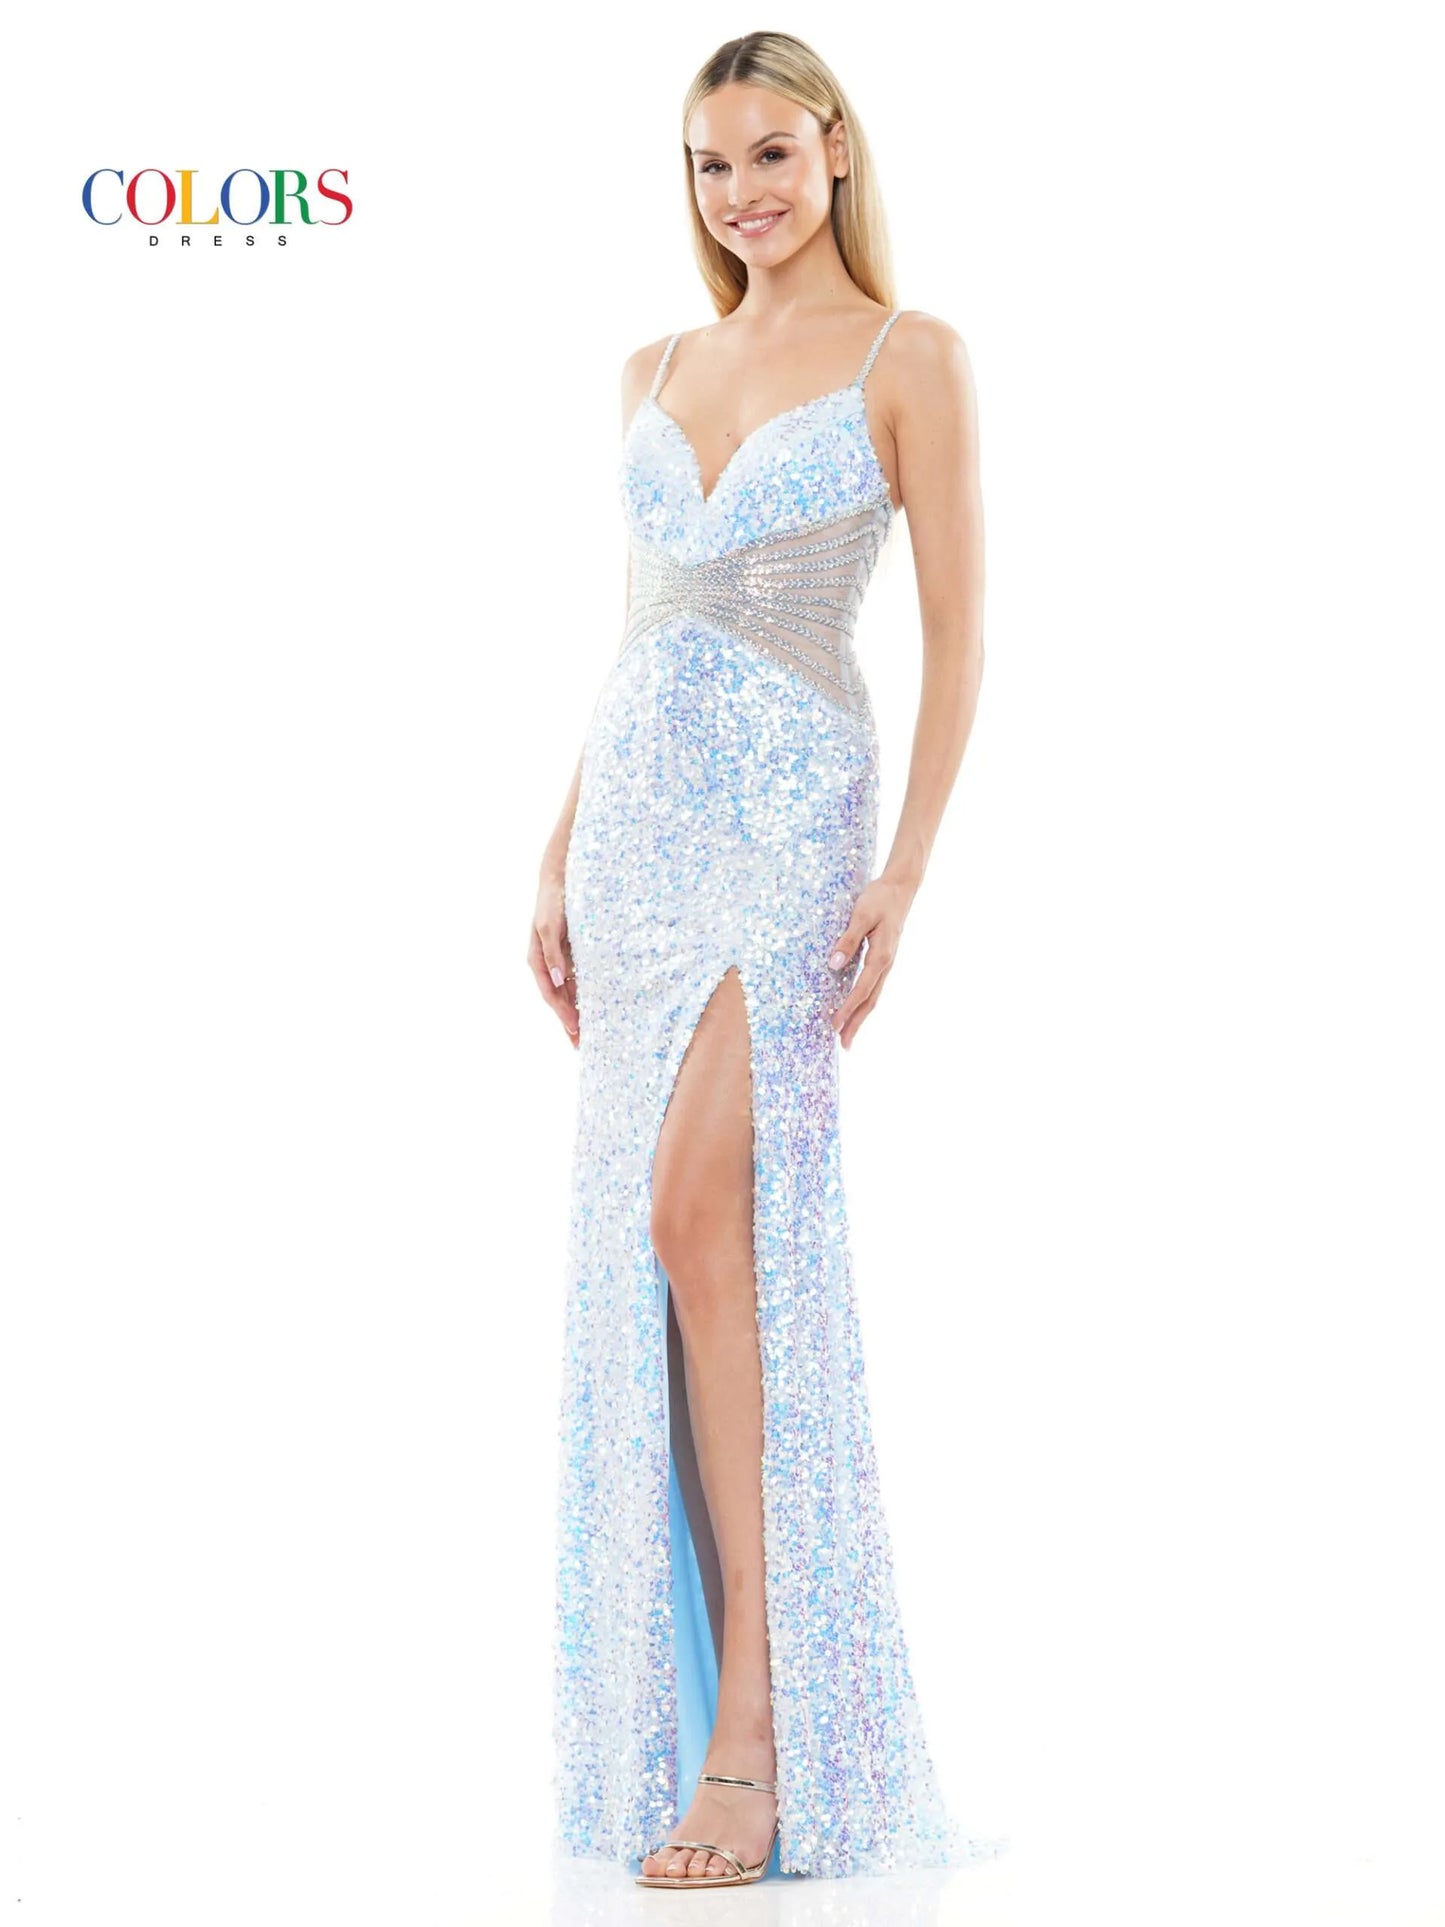 Introducing a unique, glamorous look for your next special event. Colors Dress 3300 Long Sequin Sheer Cutout Crystal Lined Prom Dress Corset Slit Gown Pageant boasts high-shine sequins, crystal-lined cutouts, and a corset-detailed back. Curve-hugging with a daring thigh-high slit, this prom dress is perfect for an unforgettable night.  Sizes: 0-20  Colors: Black, Light Blue, Deep Green, Hot Pink, Lilac